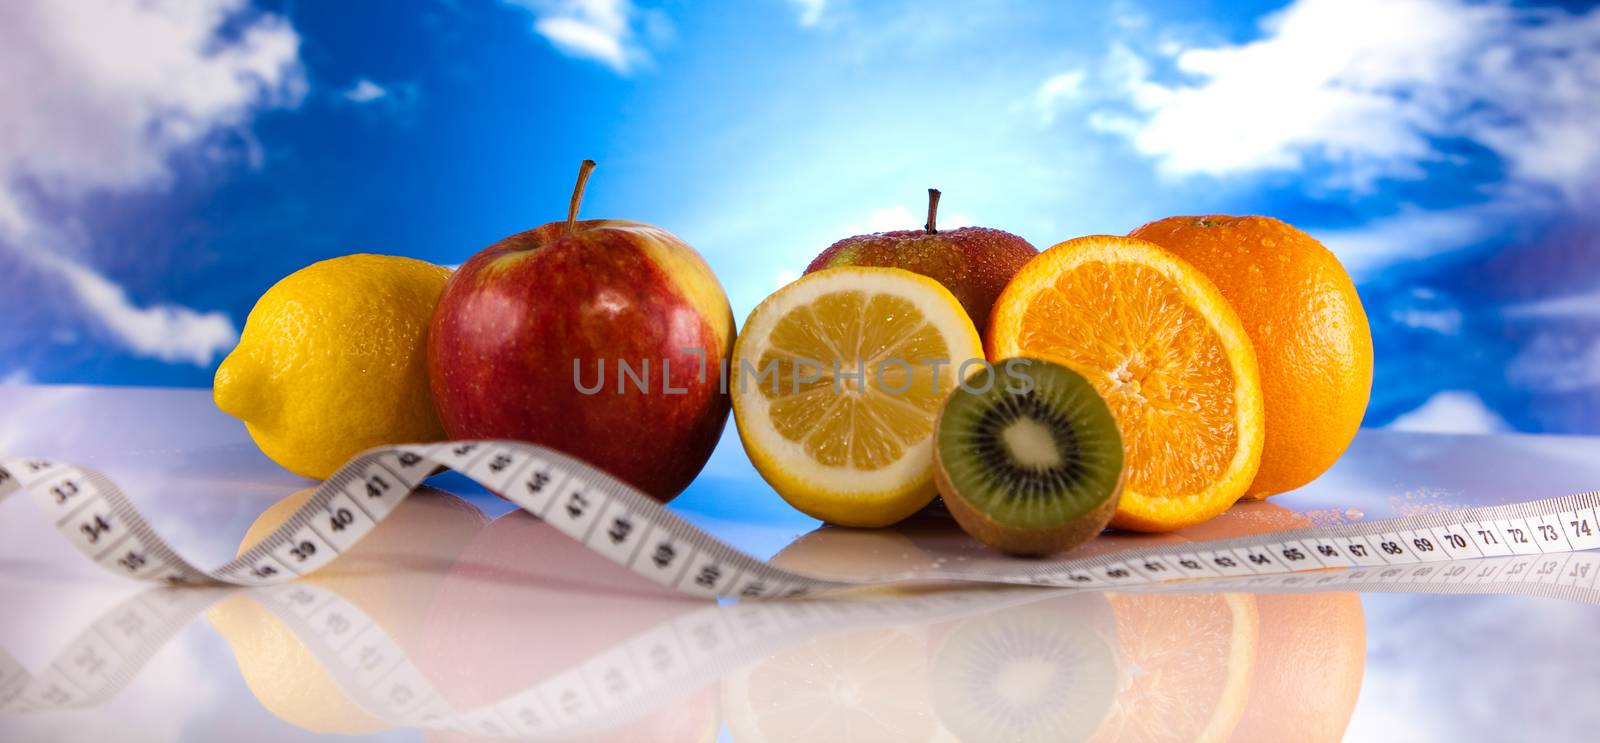 Vegetable, Fruits and fitness, bright colorful tone concept